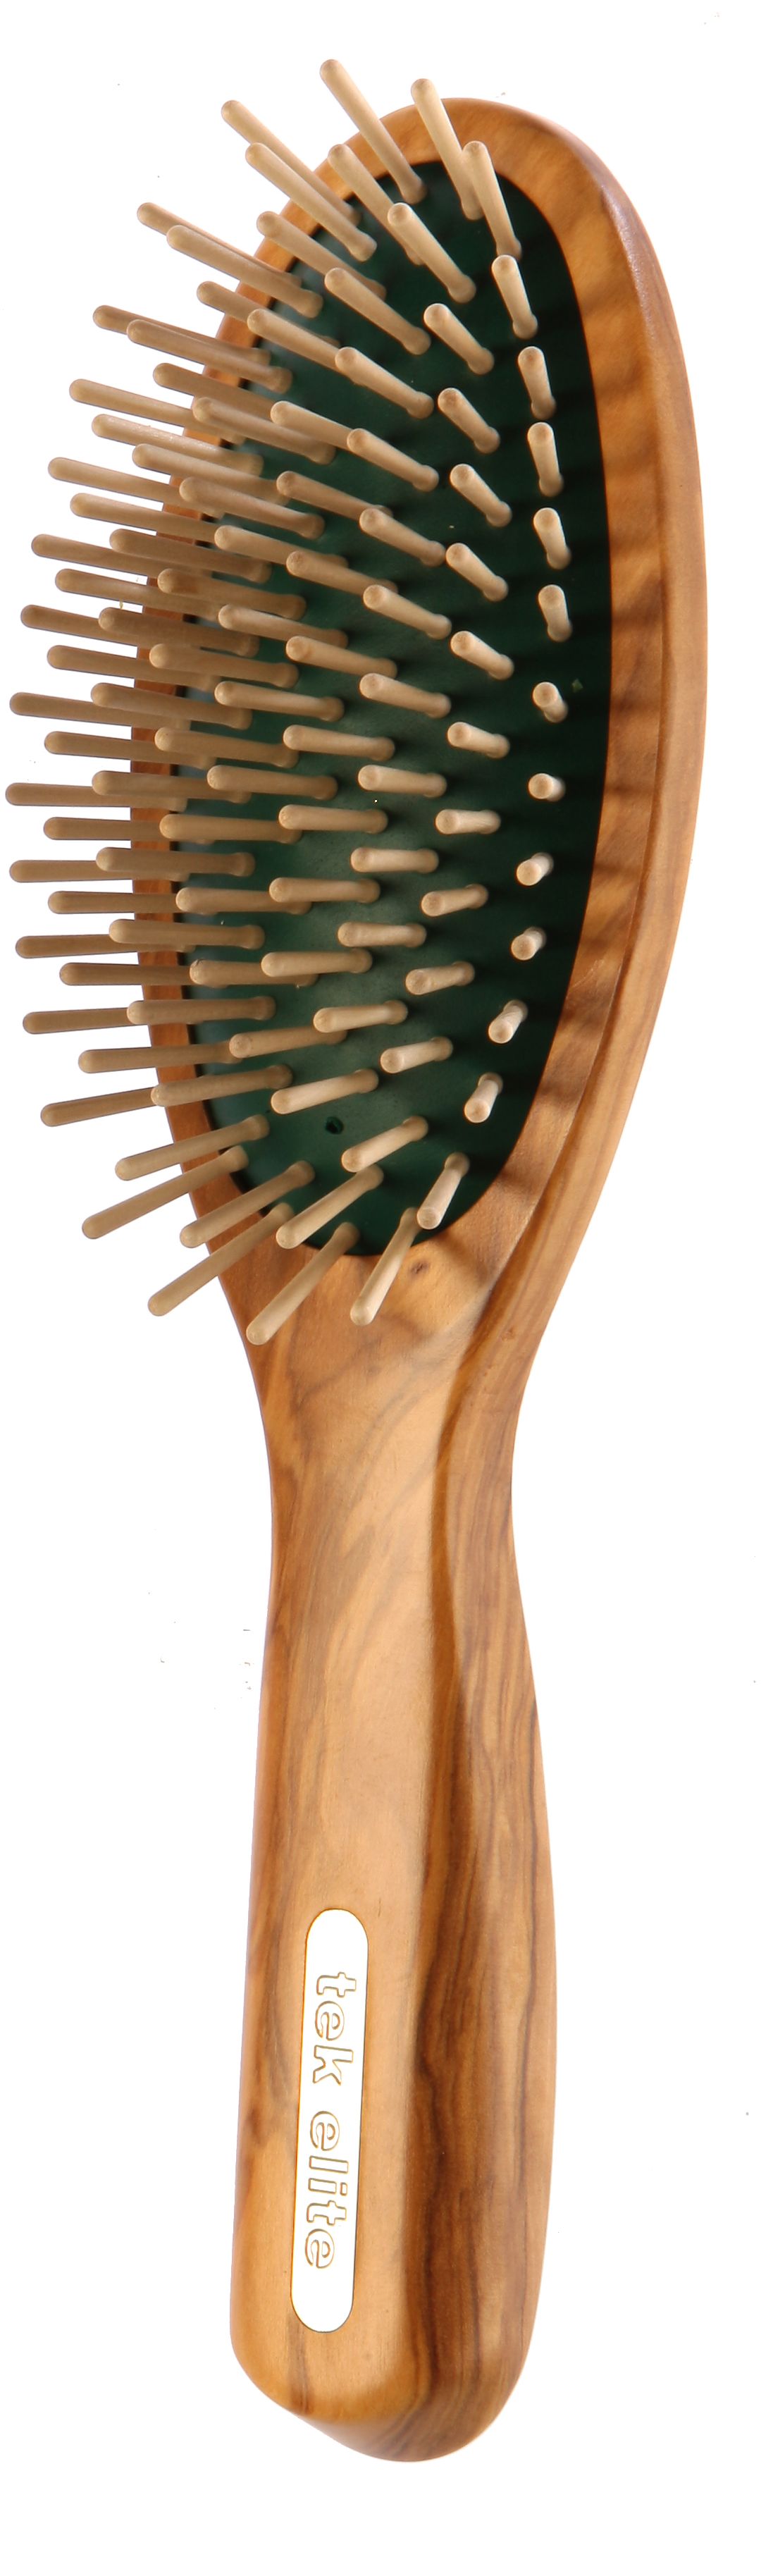 tek | Hair brush made in Italy using Forest Stewardship Council ...